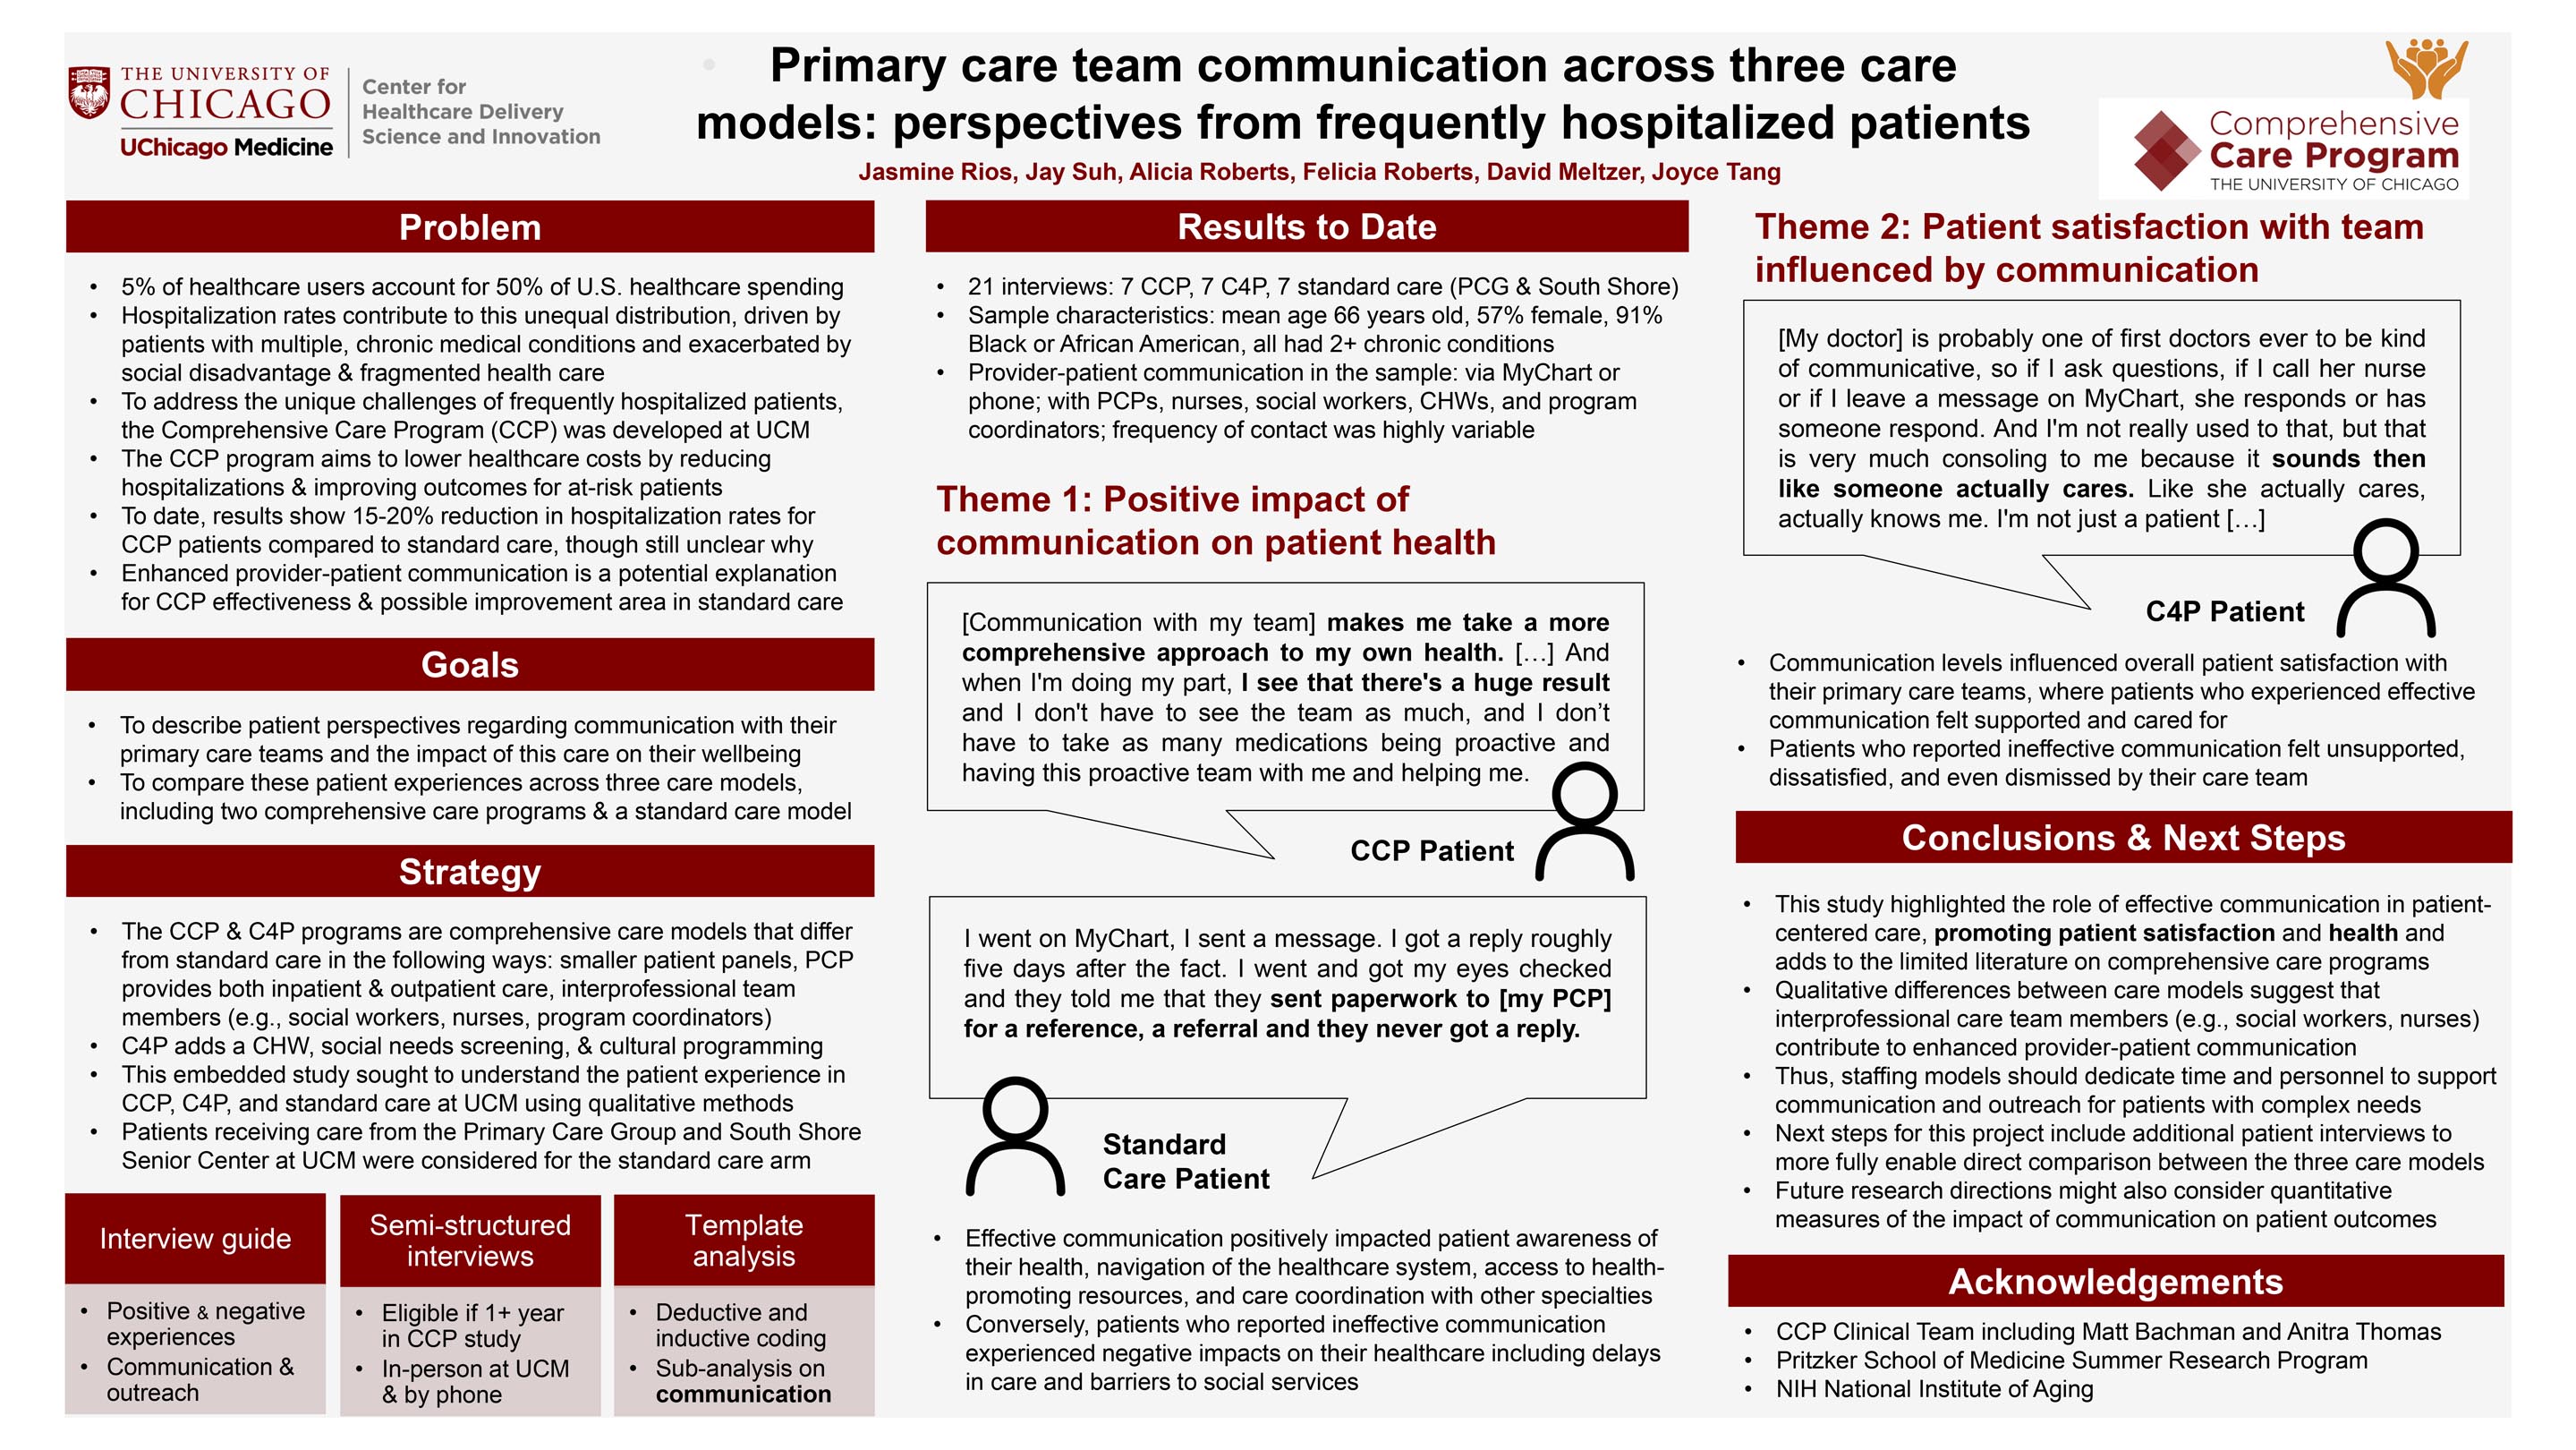 RIOS_Primary-care-team-communication-across-three-care-models